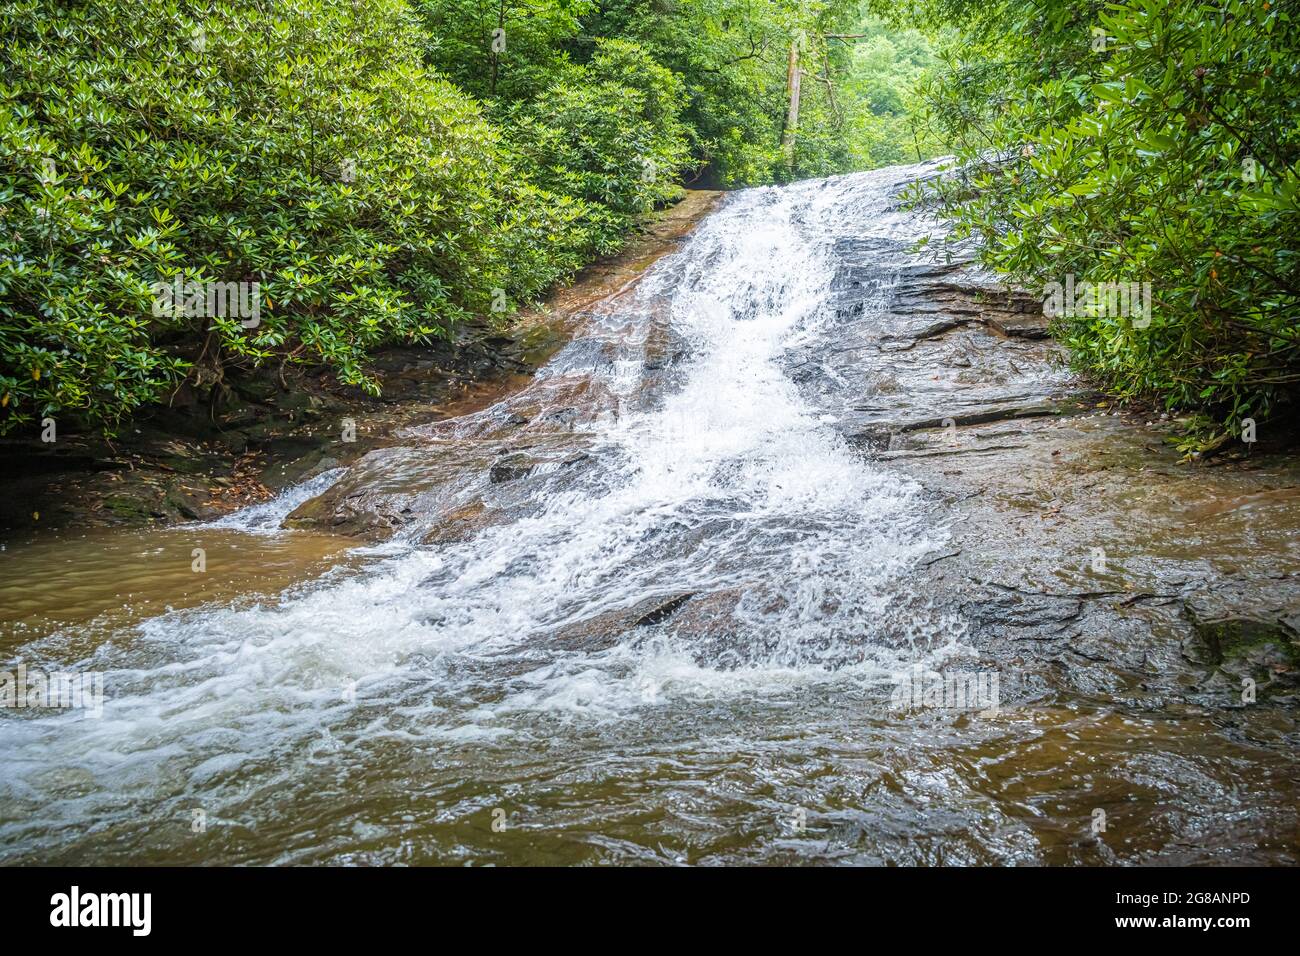 The lower section at Helton Creek Falls, a set of beautiful waterfalls in the North Georgia Mountains' Chattahoochee National Forest near Blairsville. Stock Photo